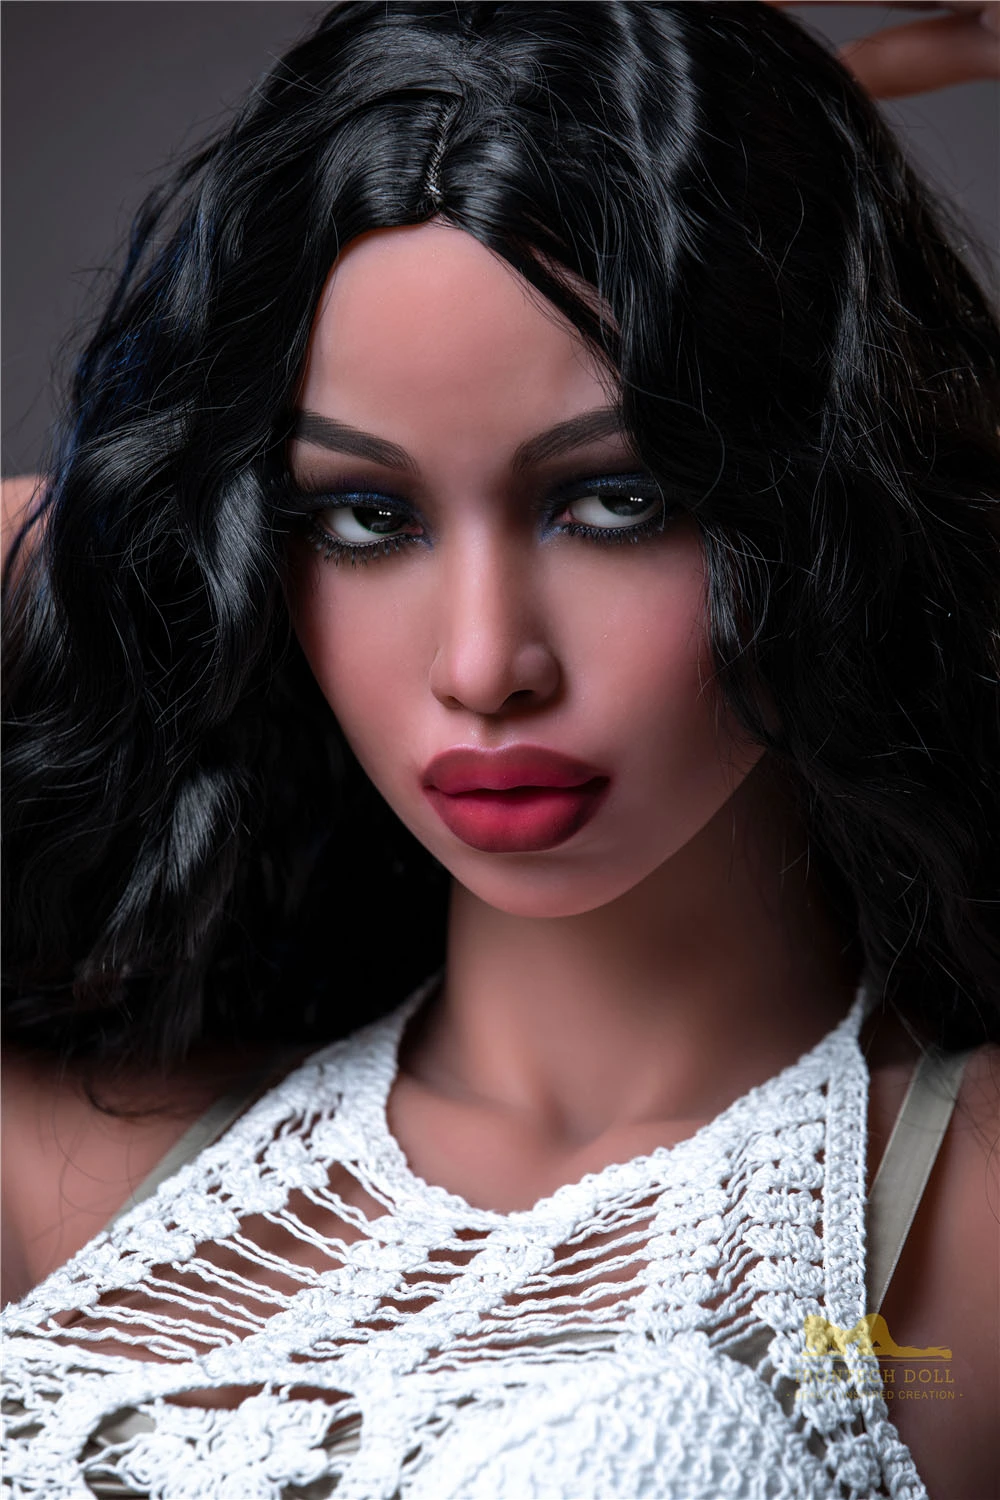  real black sexdoll face detail